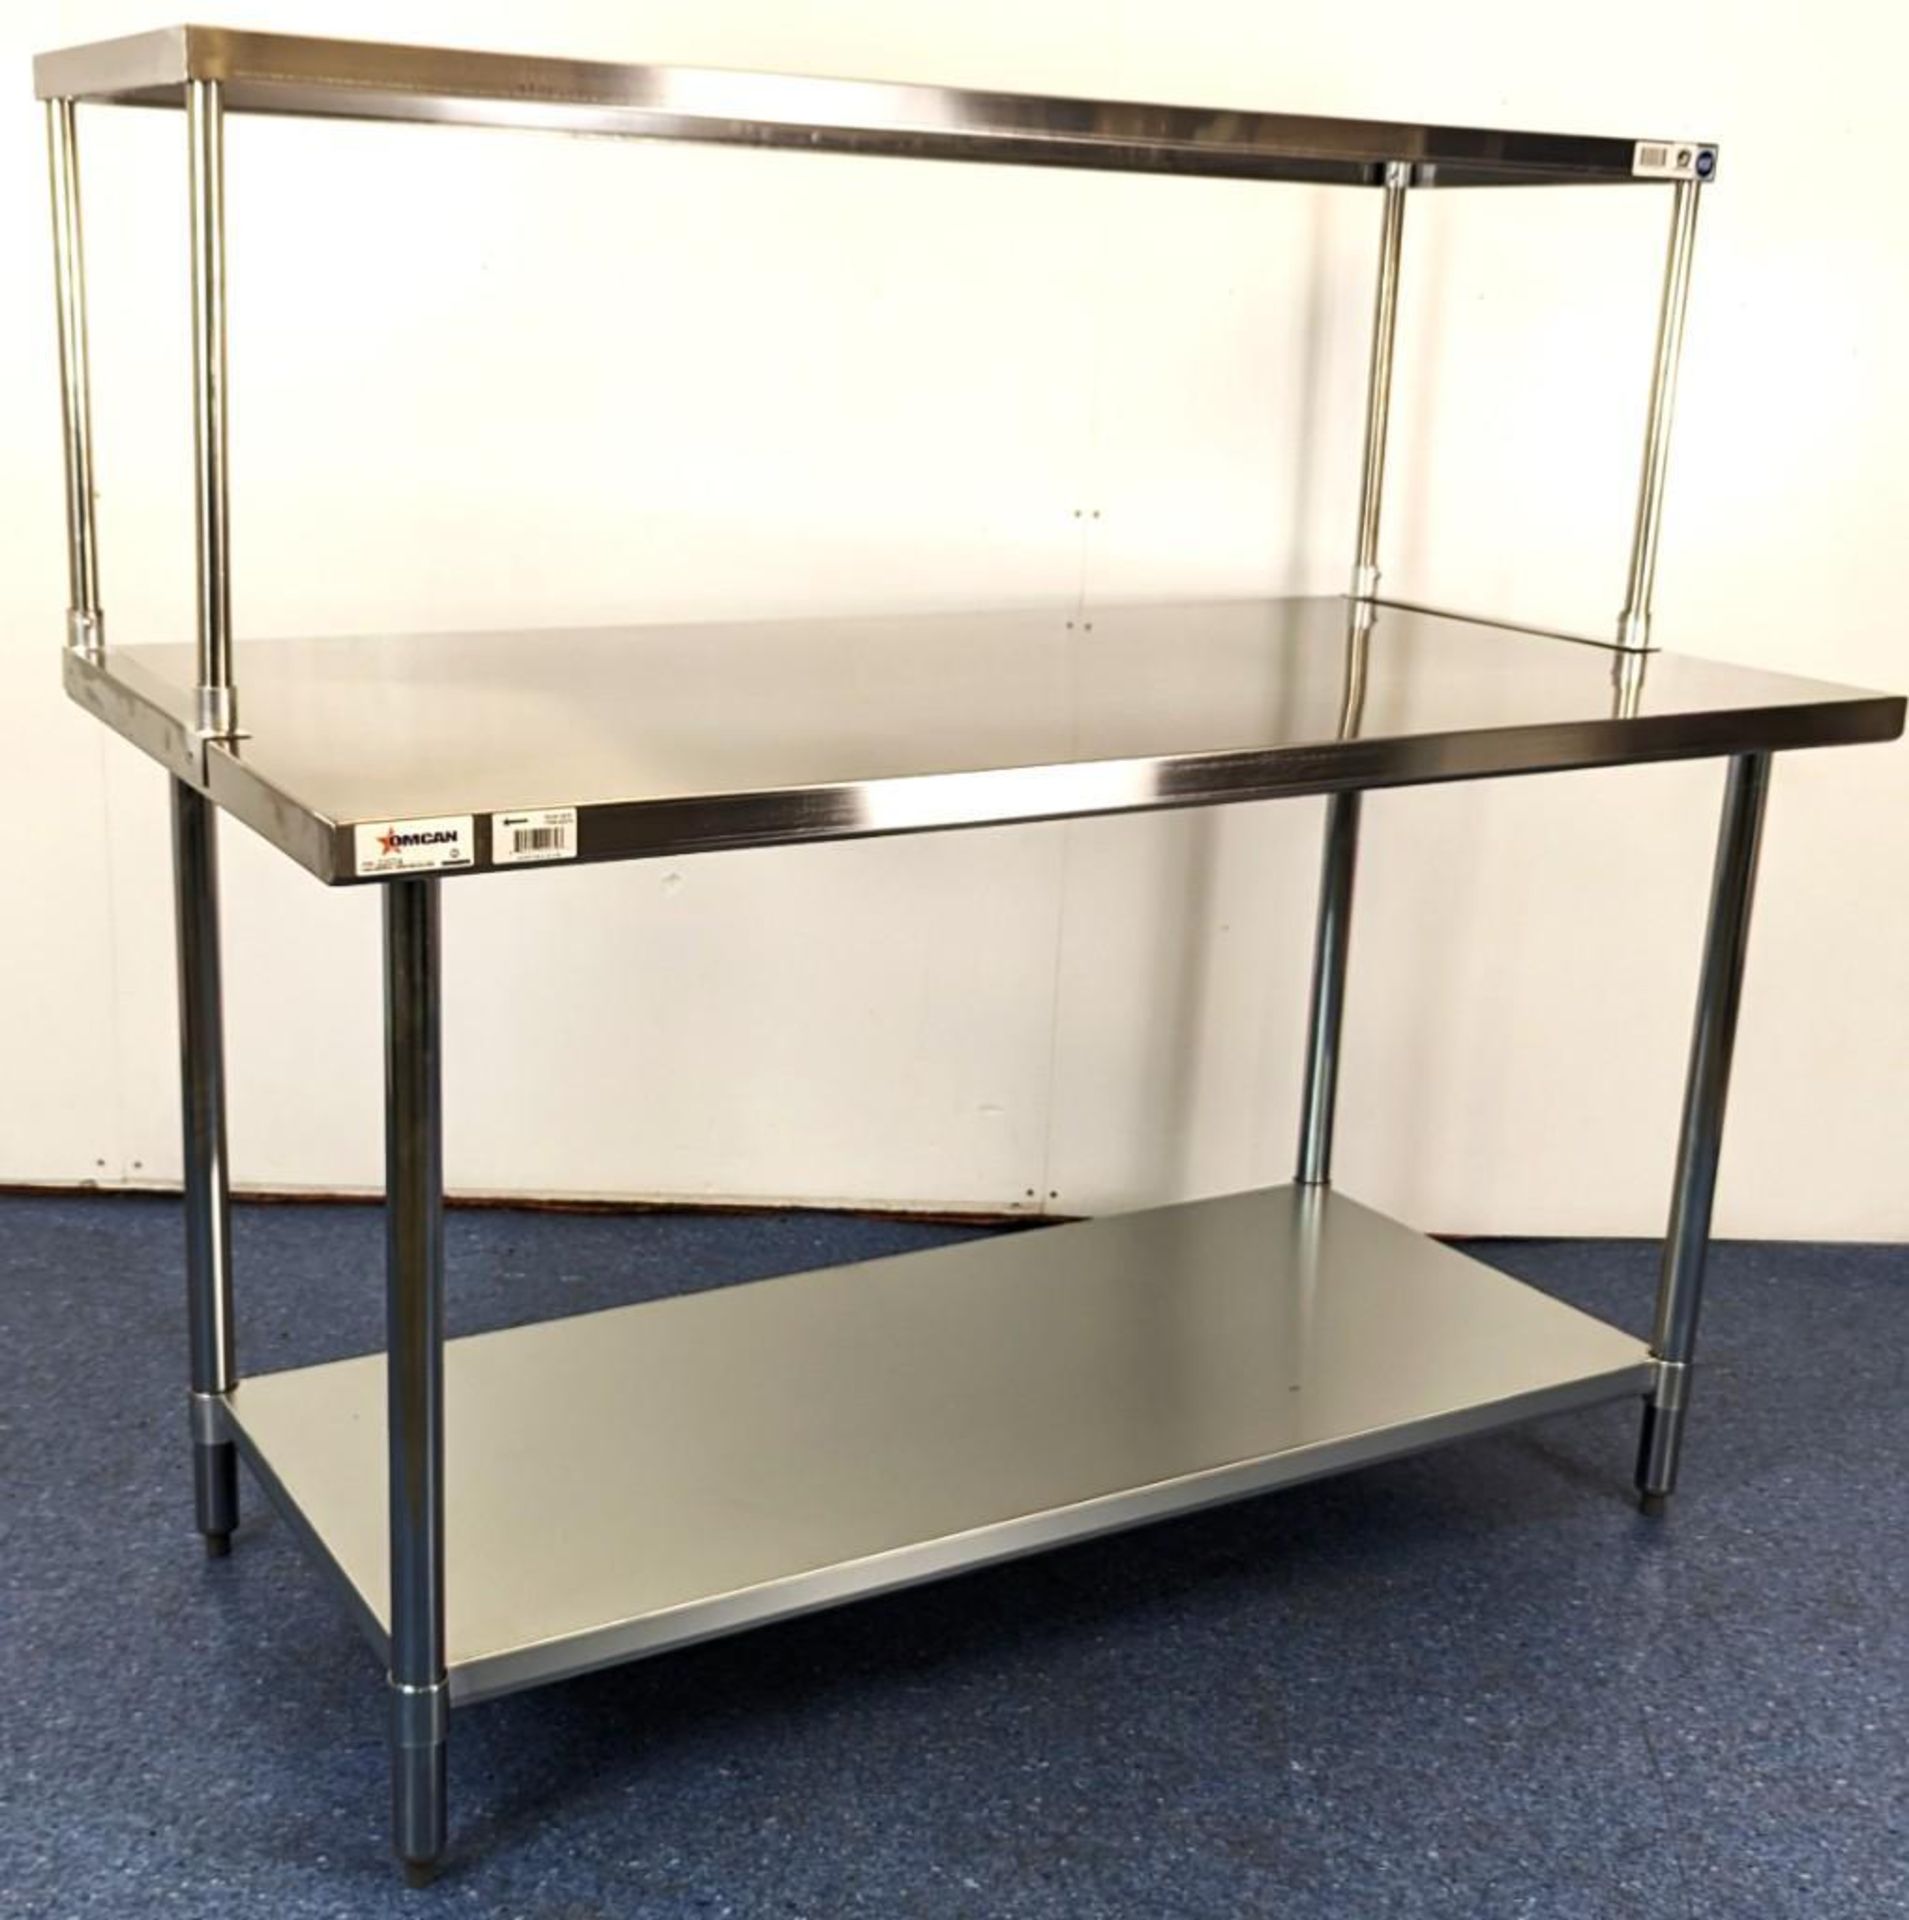 NEW 30" X 60" STAINLESS WORK TABLE WITH 18" SINGLE OVERSHELF